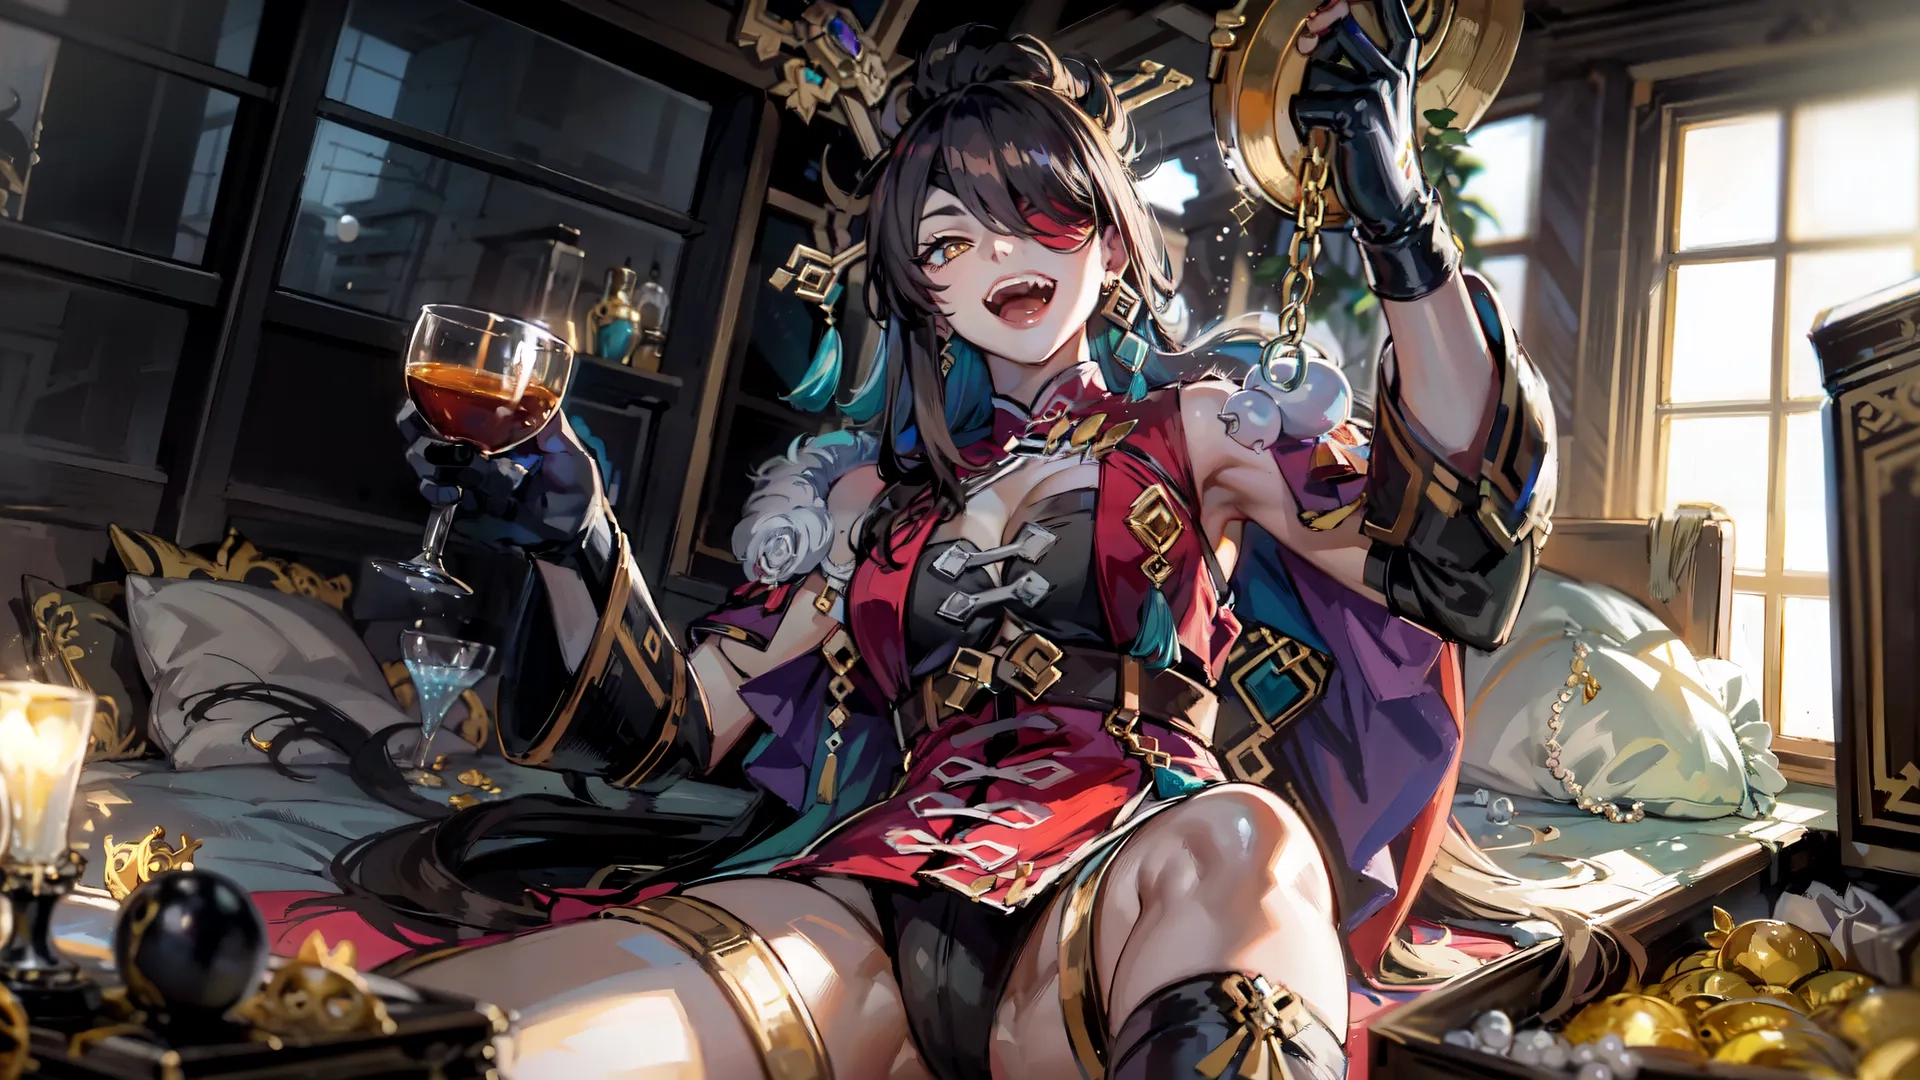 a digital painting shows a young lady in a fancy dress with lots of wine bottles on a bed at her feet, wearing a full - length
